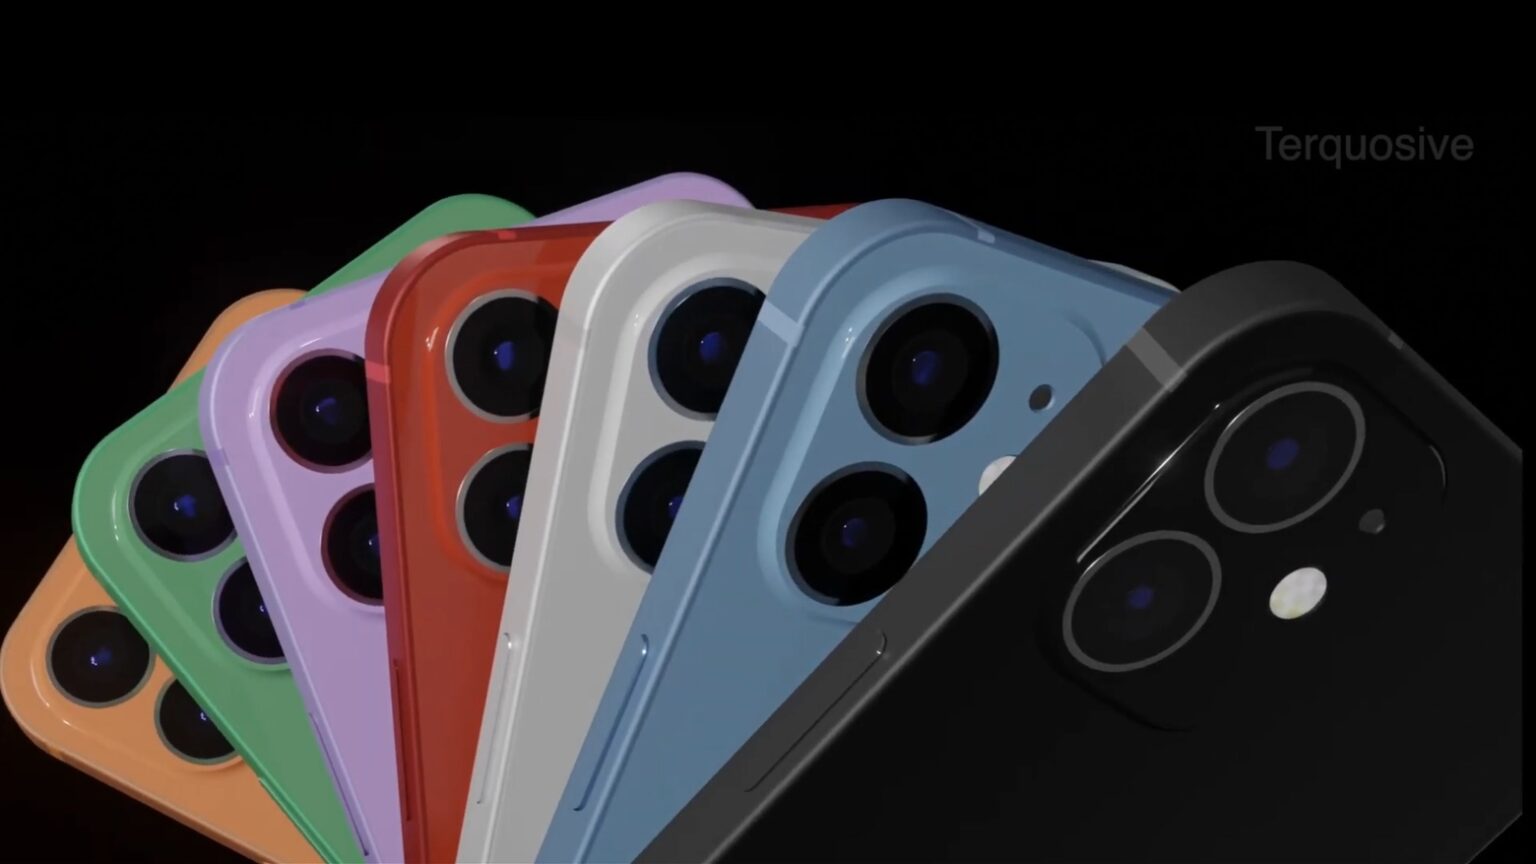 An iPhone 12 concept video shows off lots of color options.